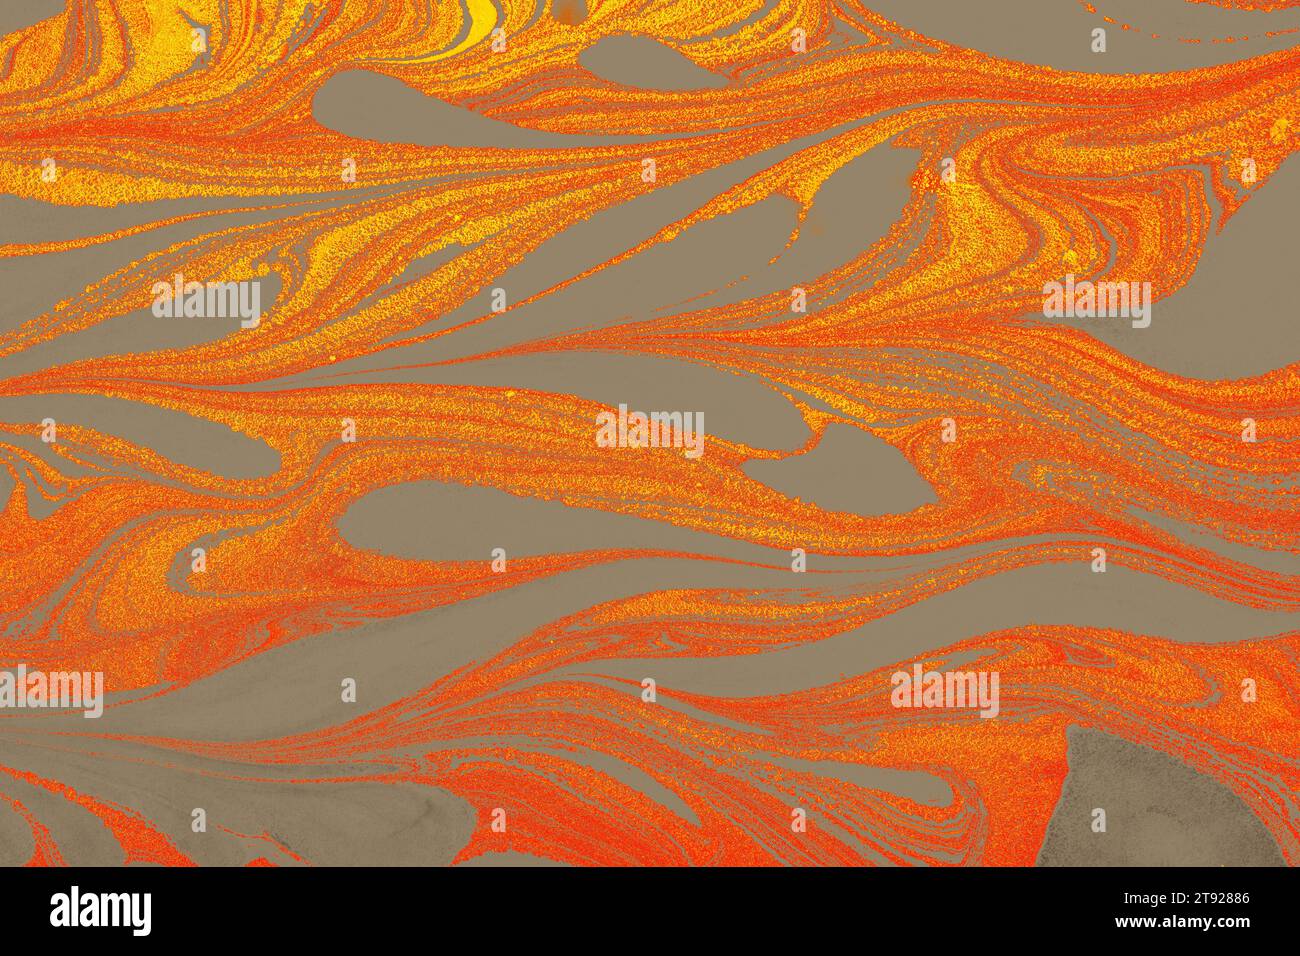 Abstract marbling pattern for fabric, design. Creative marbling background texture Stock Photo